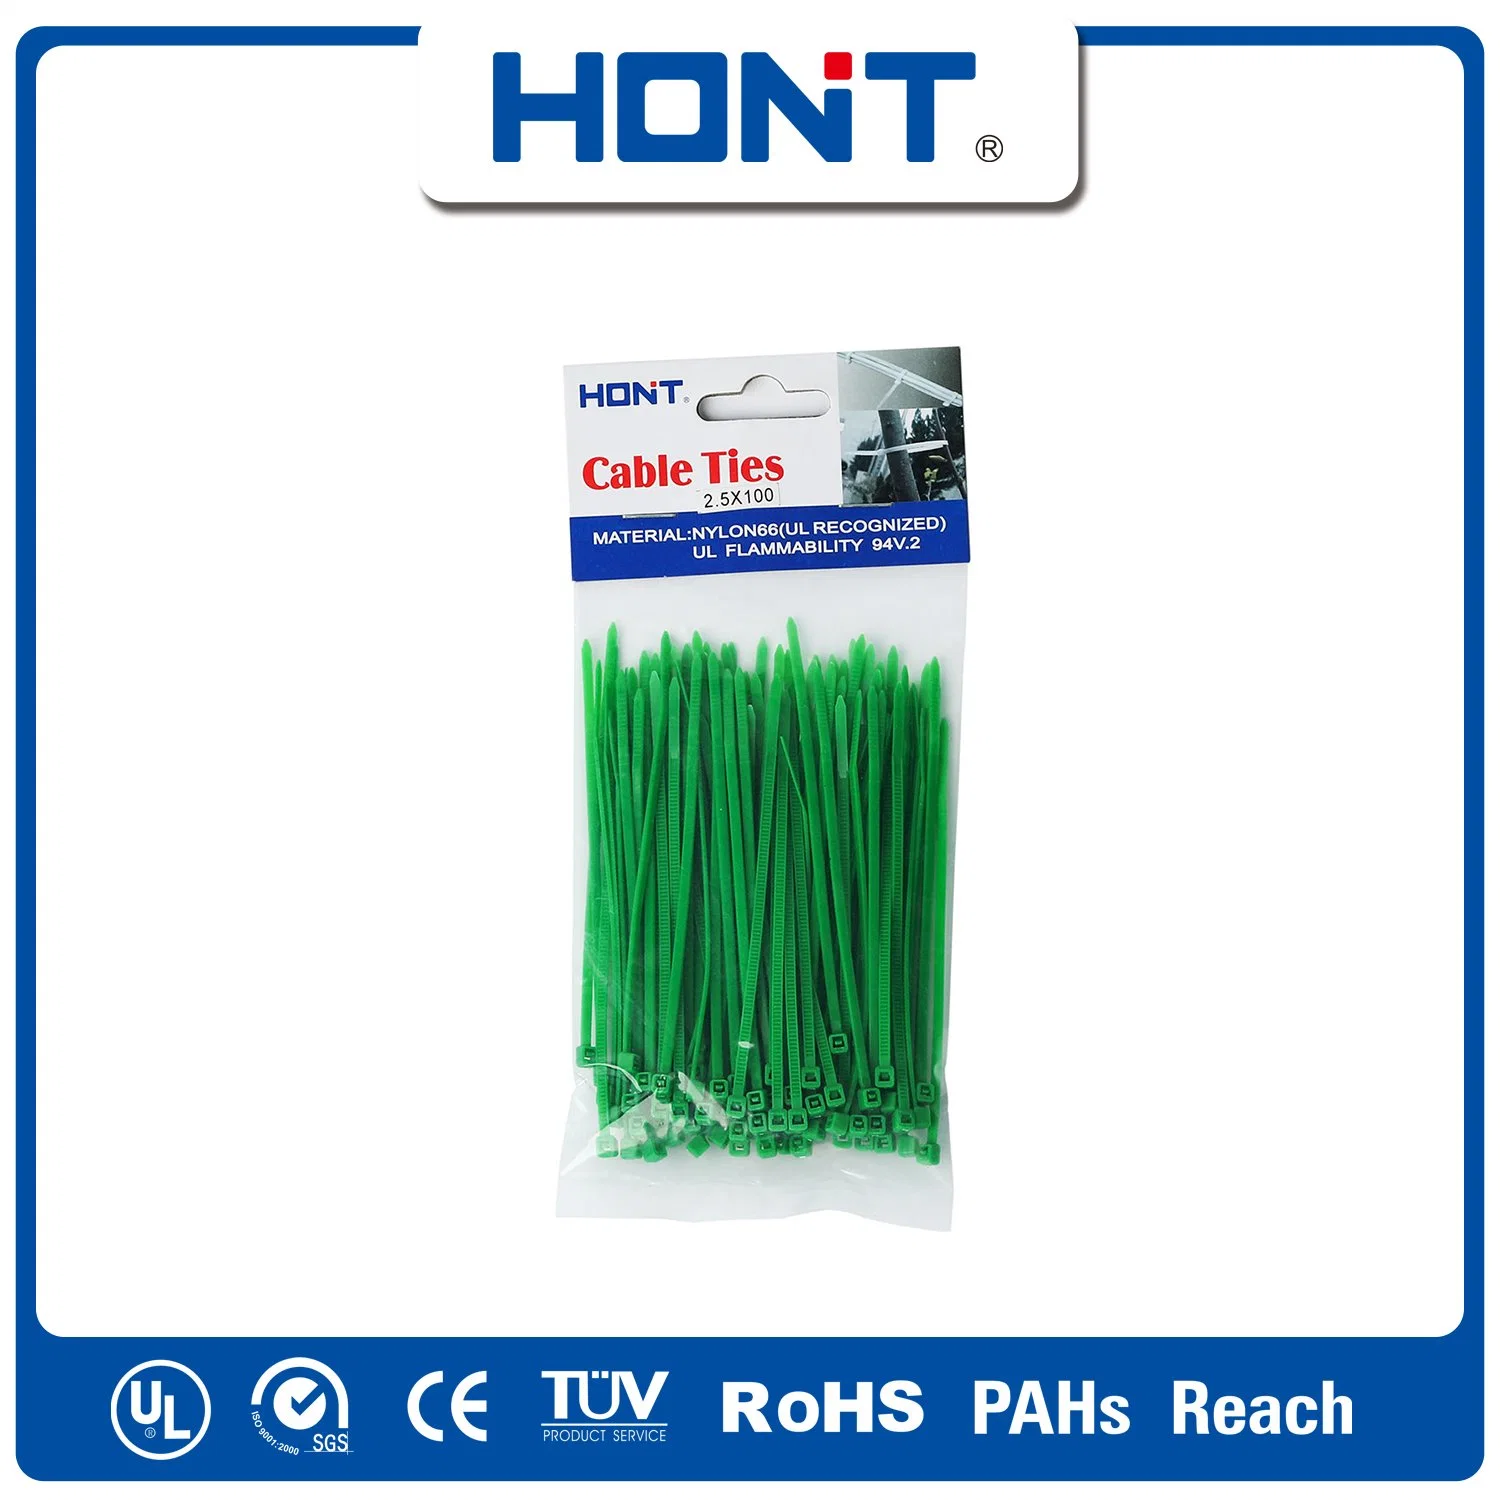 ISO Approved 94V2 Hont Plastic Bag + Sticker Exporting Carton/Tray Steel Ties Cable Accessories